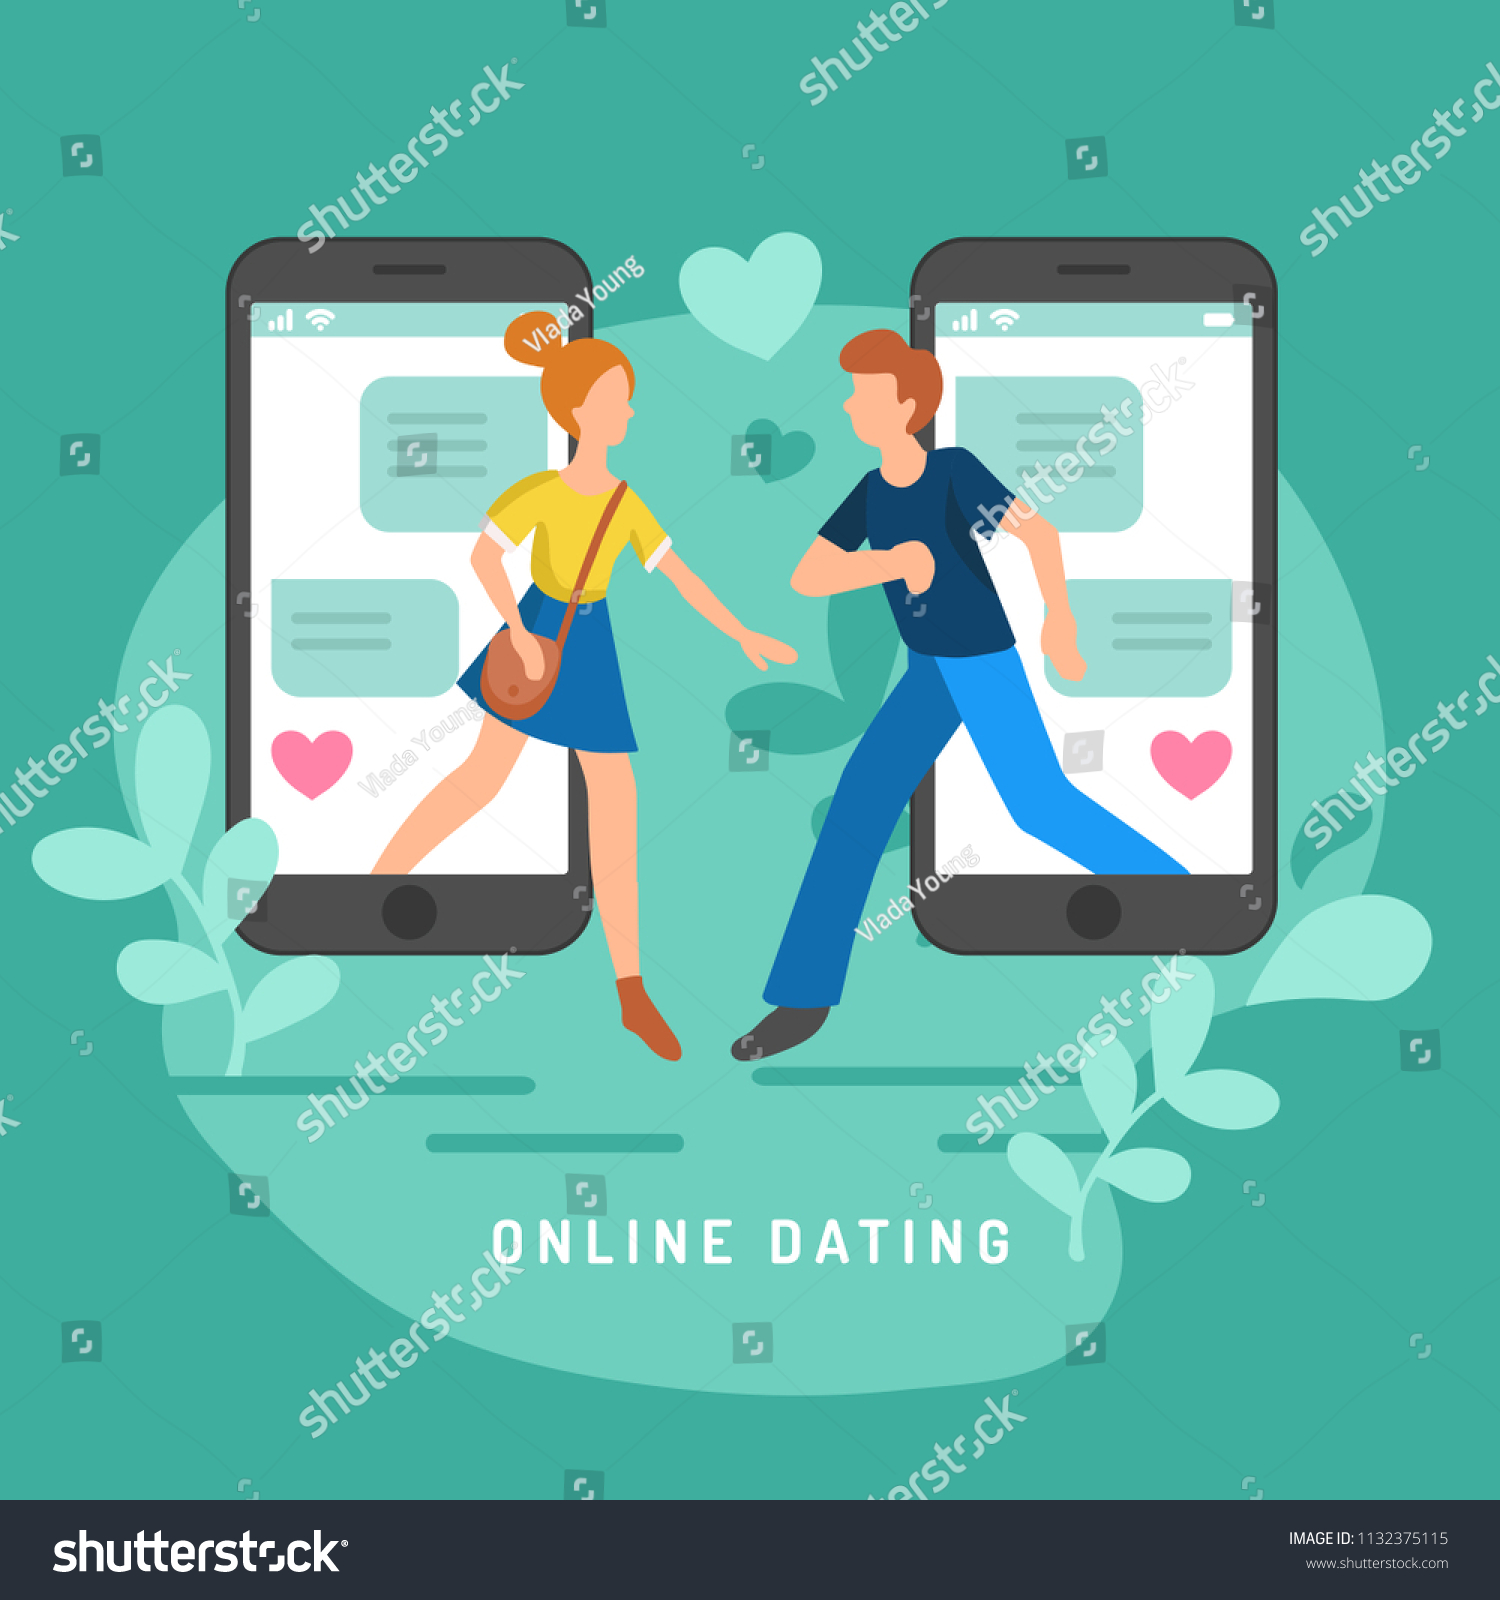 Online dating stopped messaging